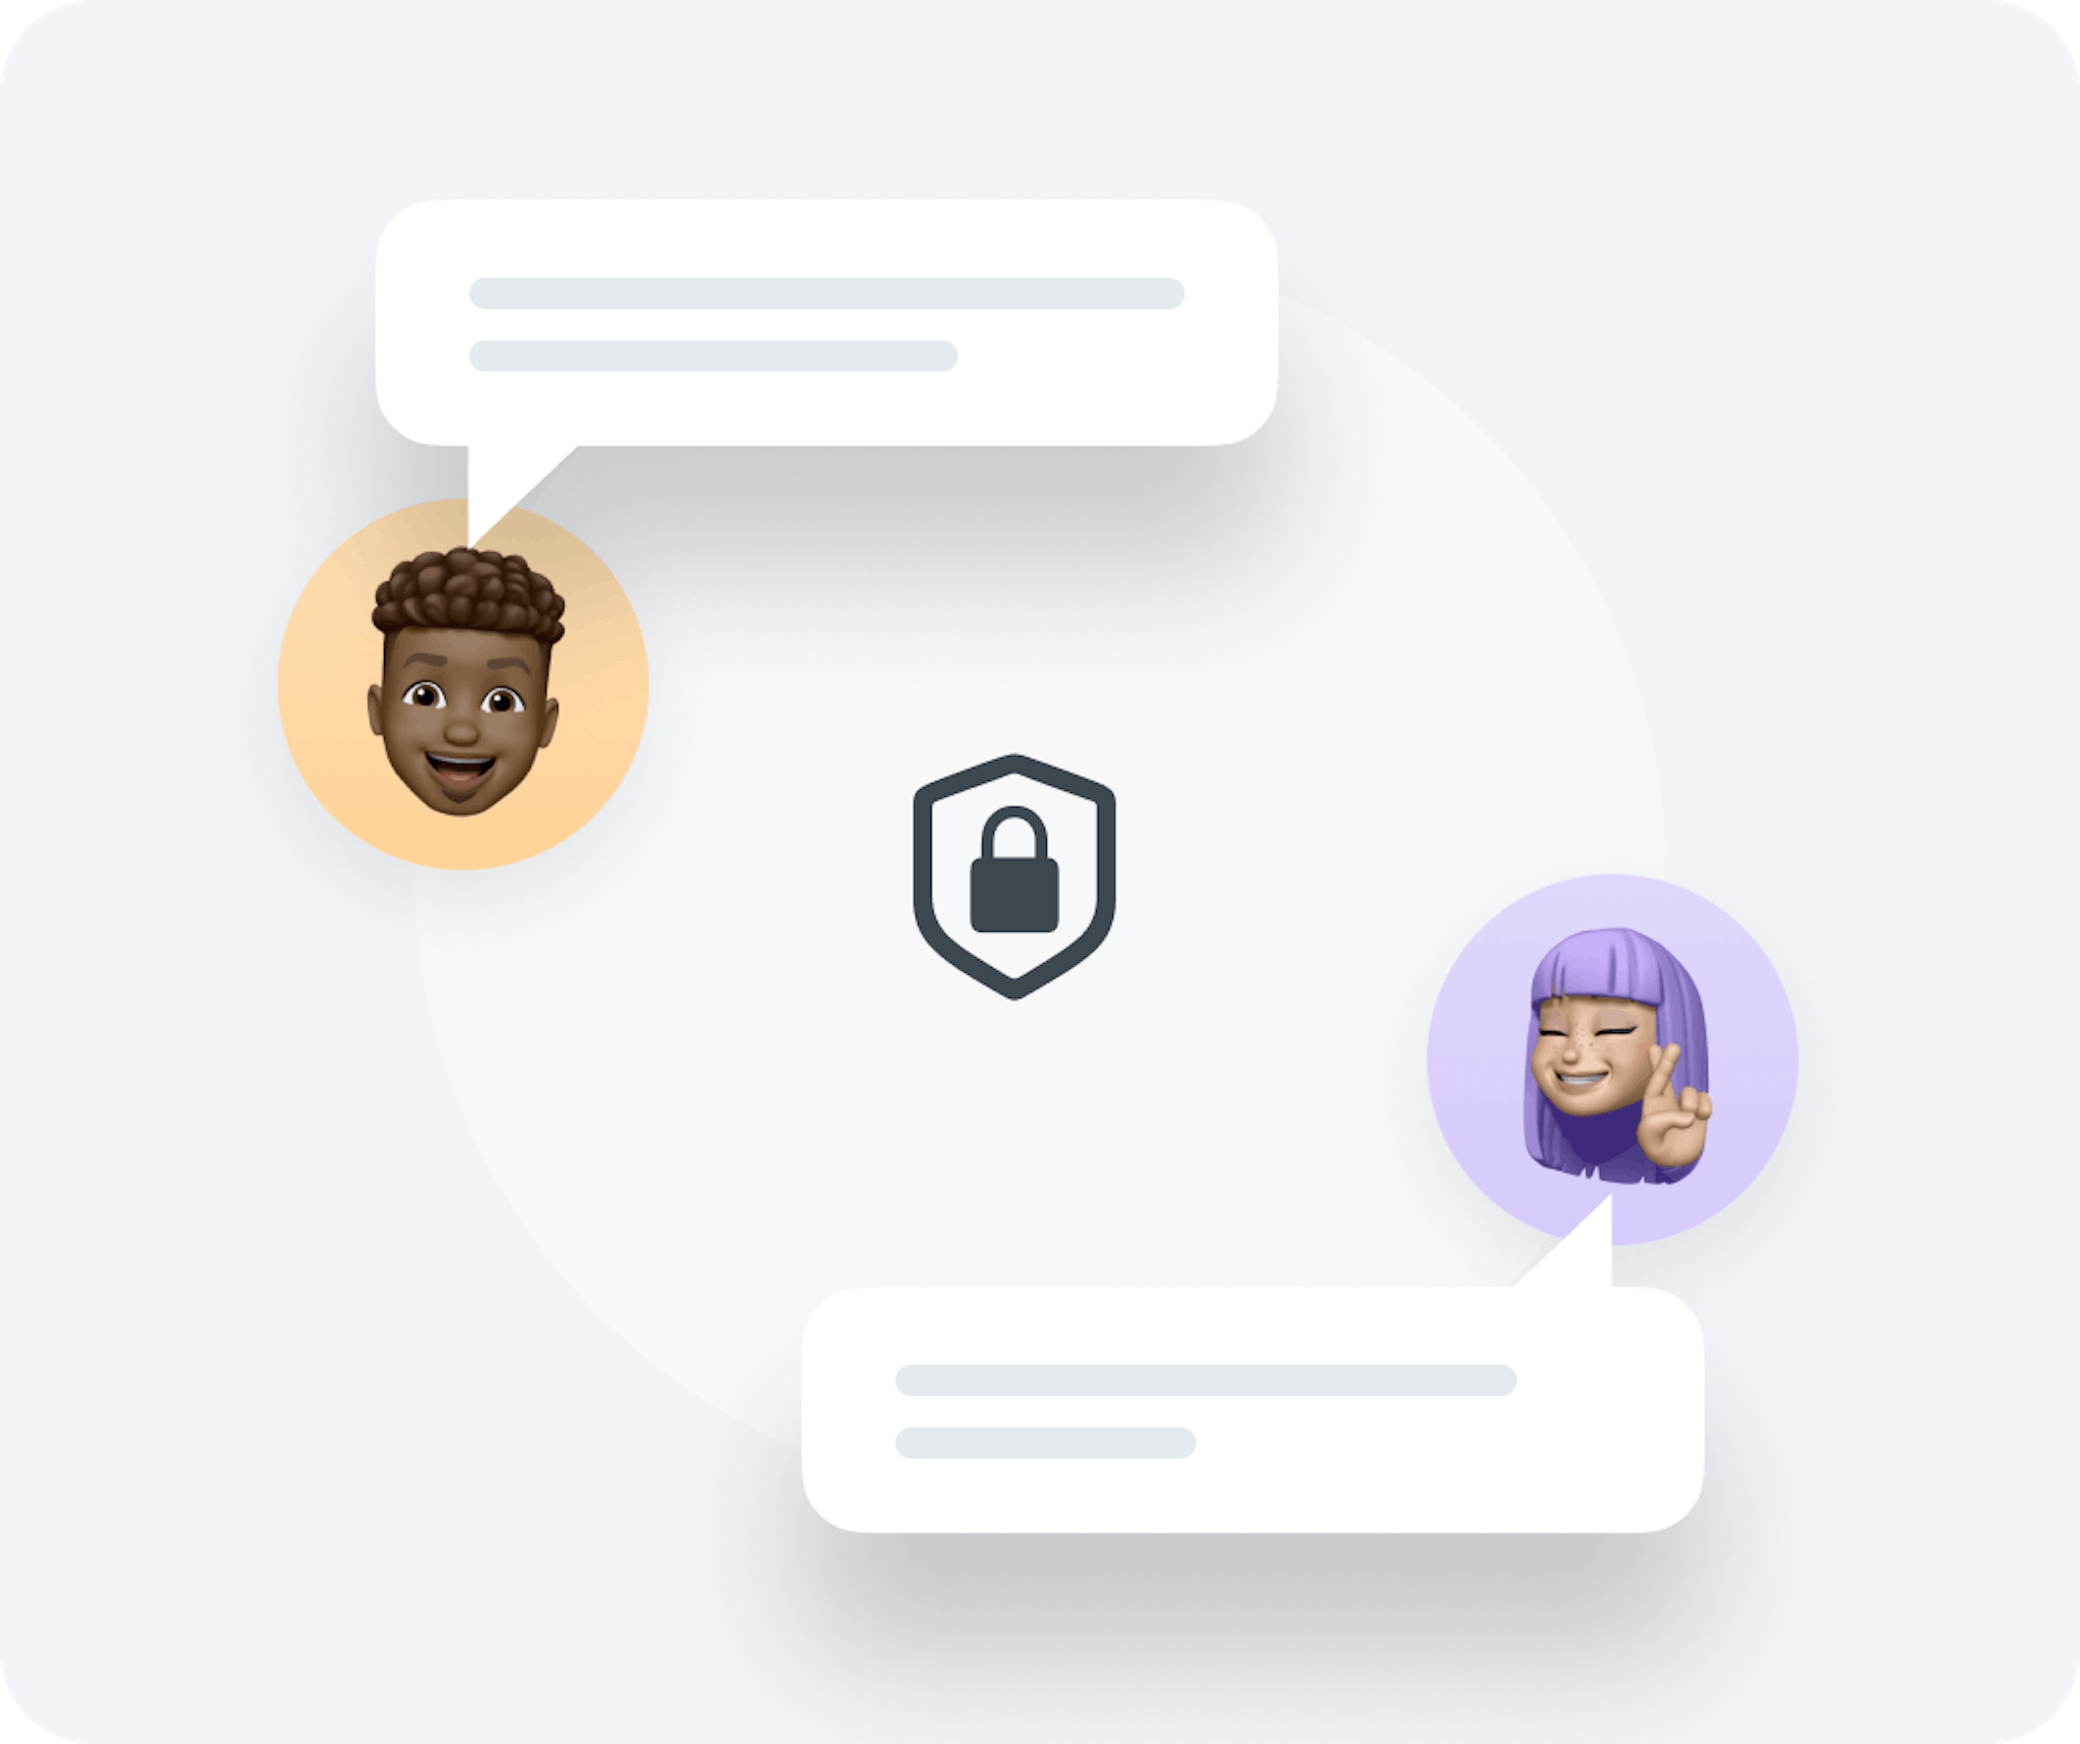 Interface graphic showing two Abler users talking via the app’s secure chat feature